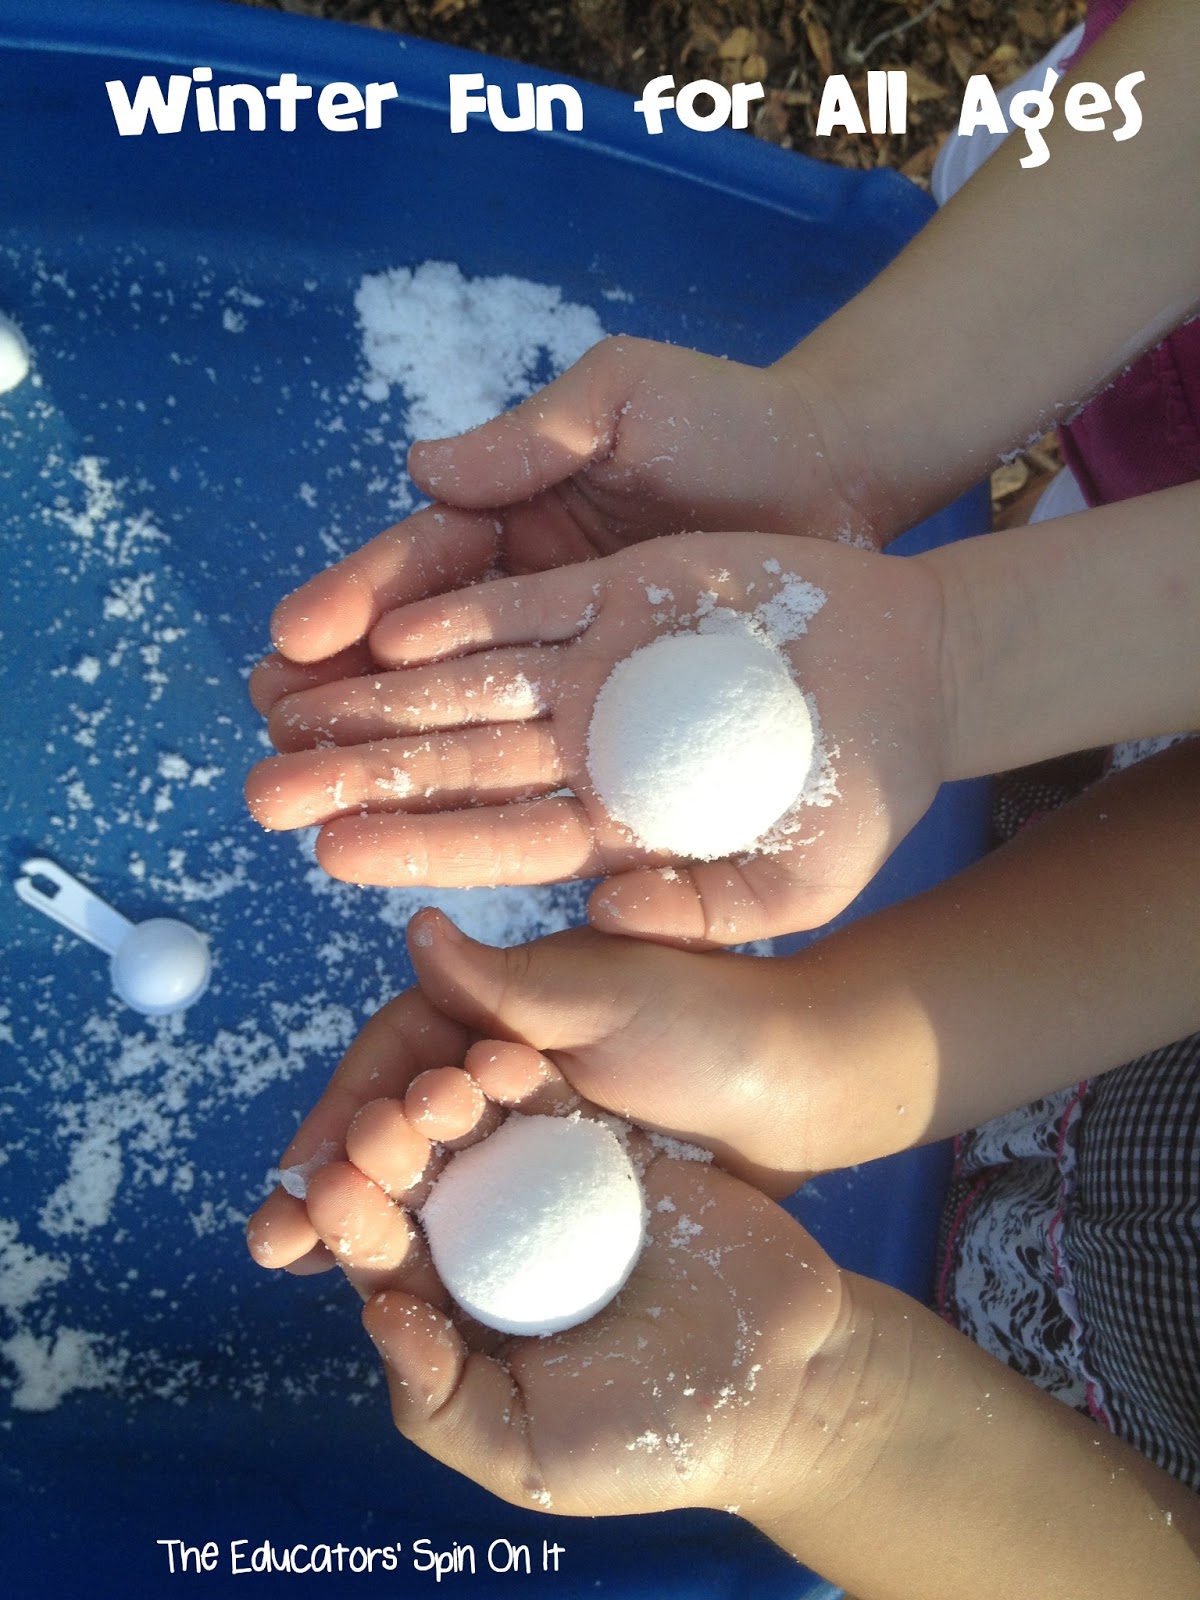 Playing with Instant Snow! A fun idea for playdates with kids. 